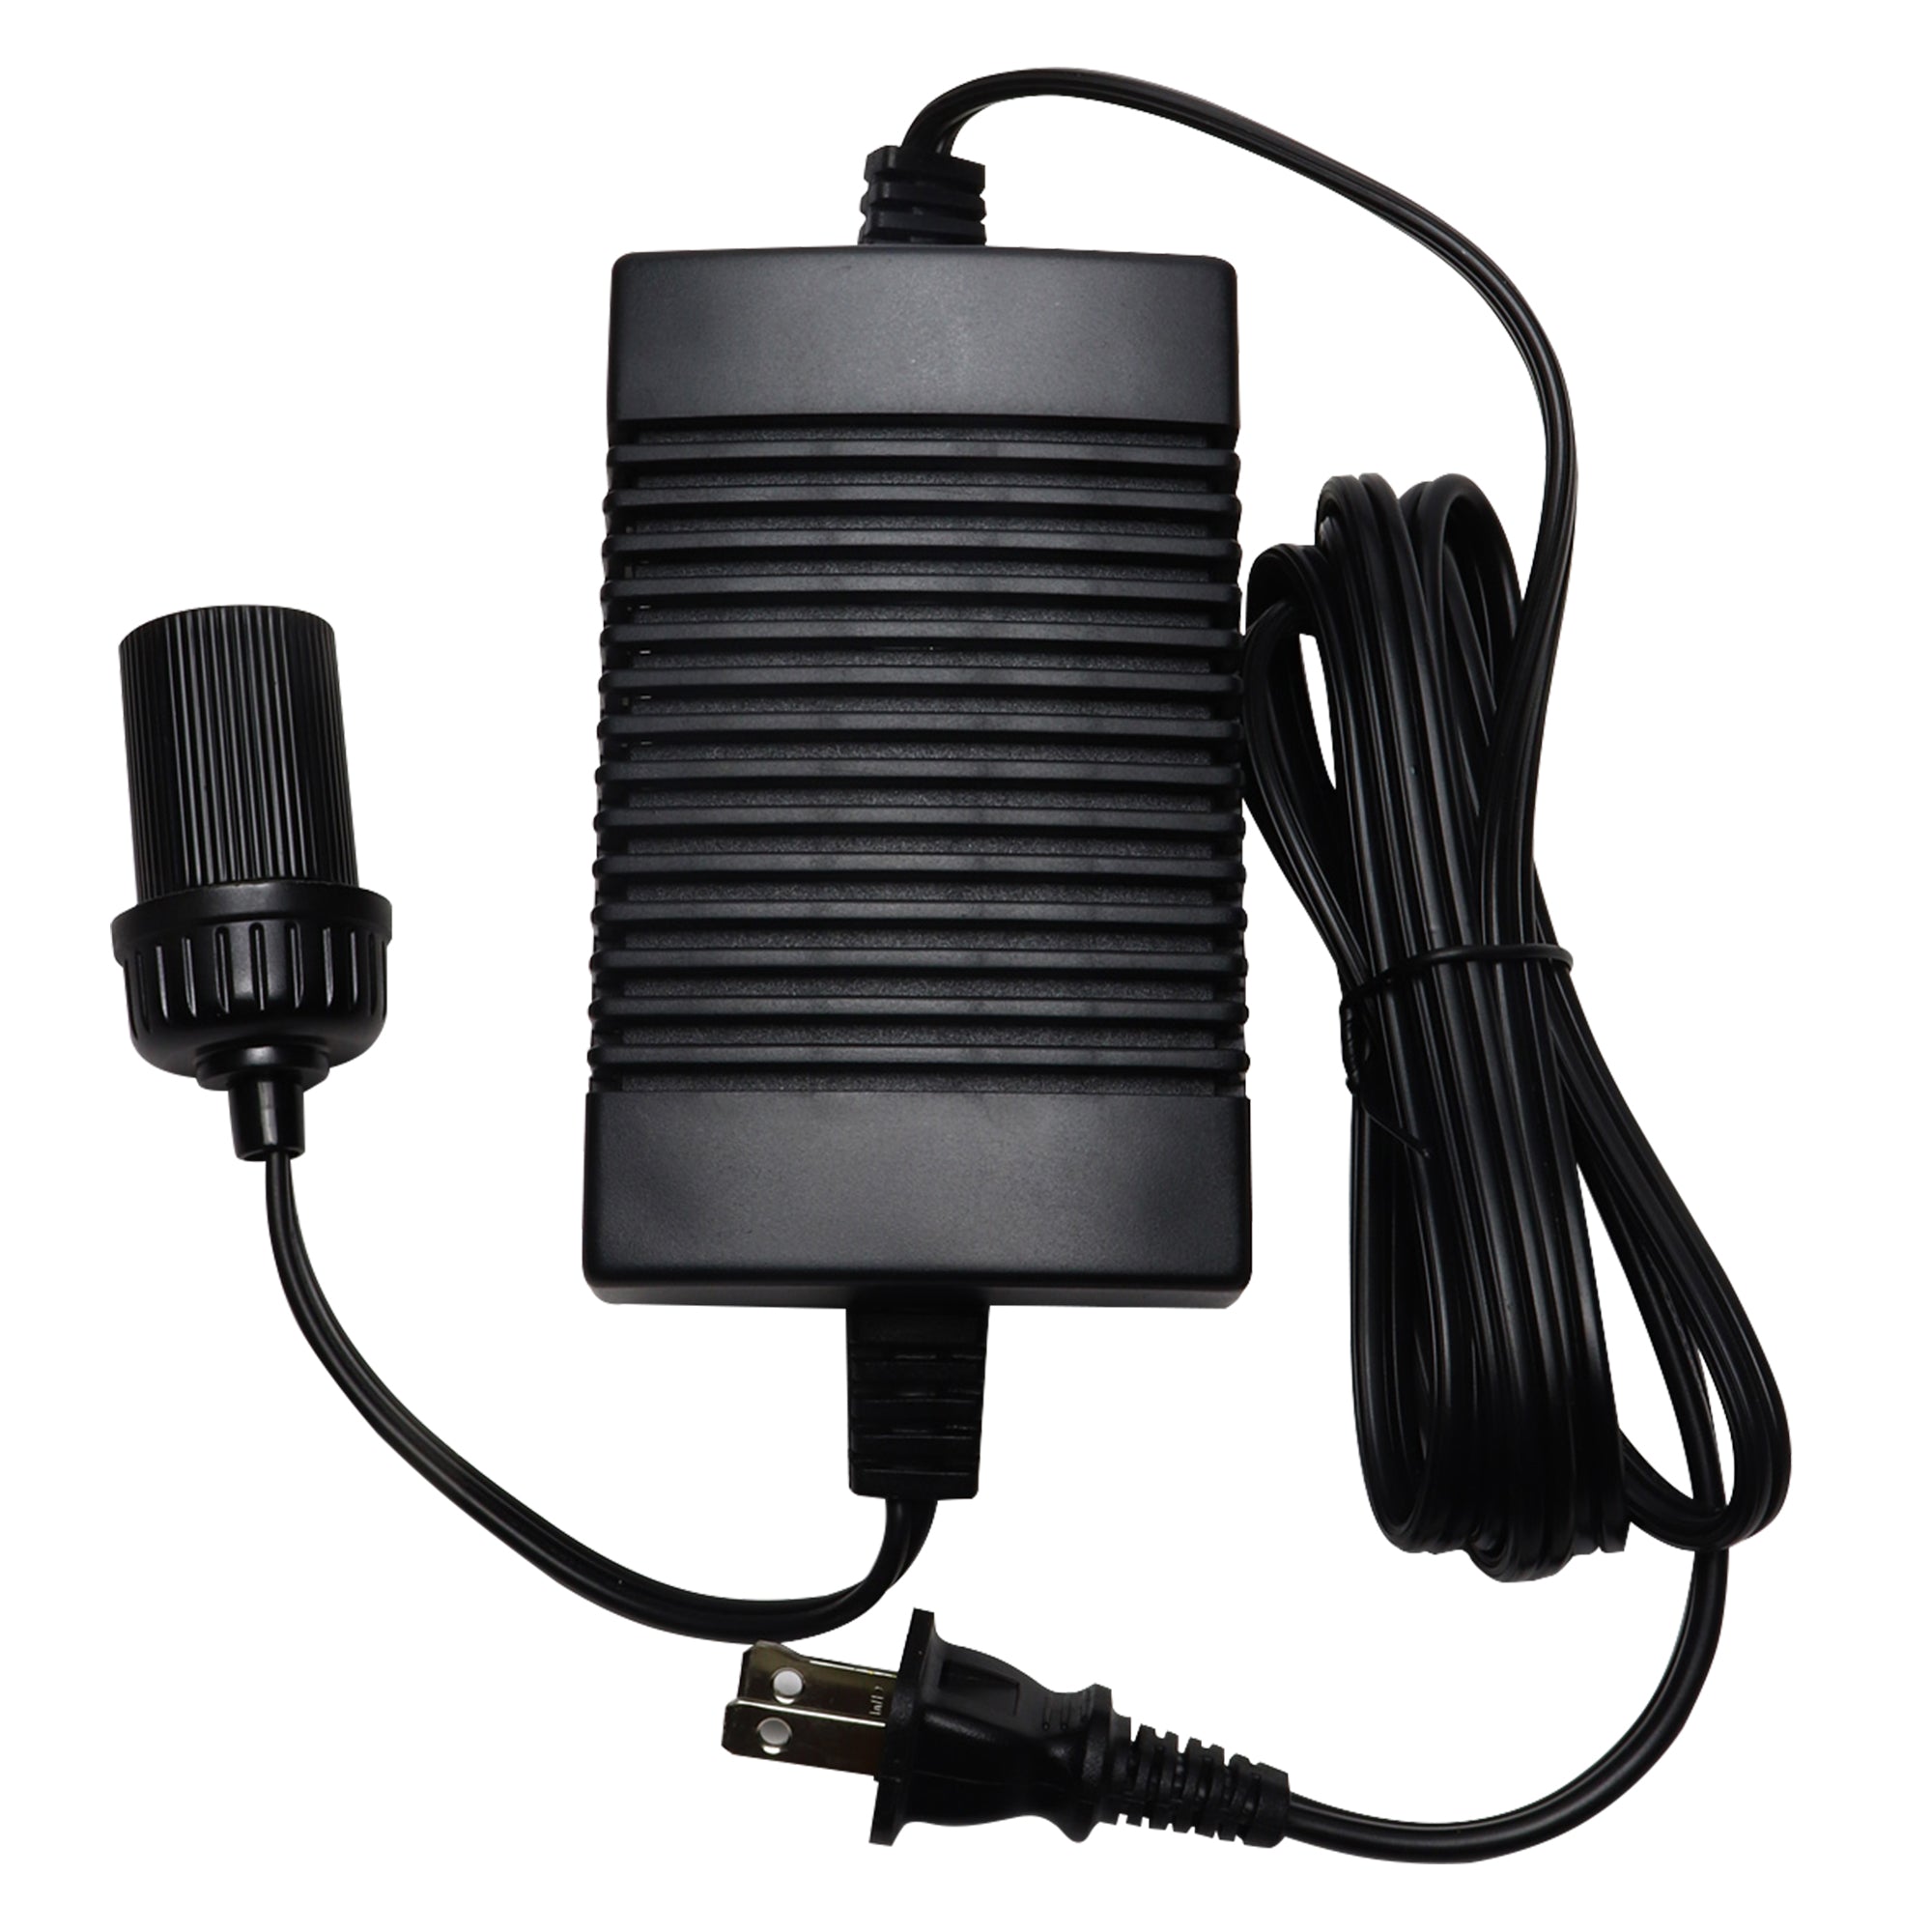 Product shot of AC to DC power adapter viewed from above on a white background